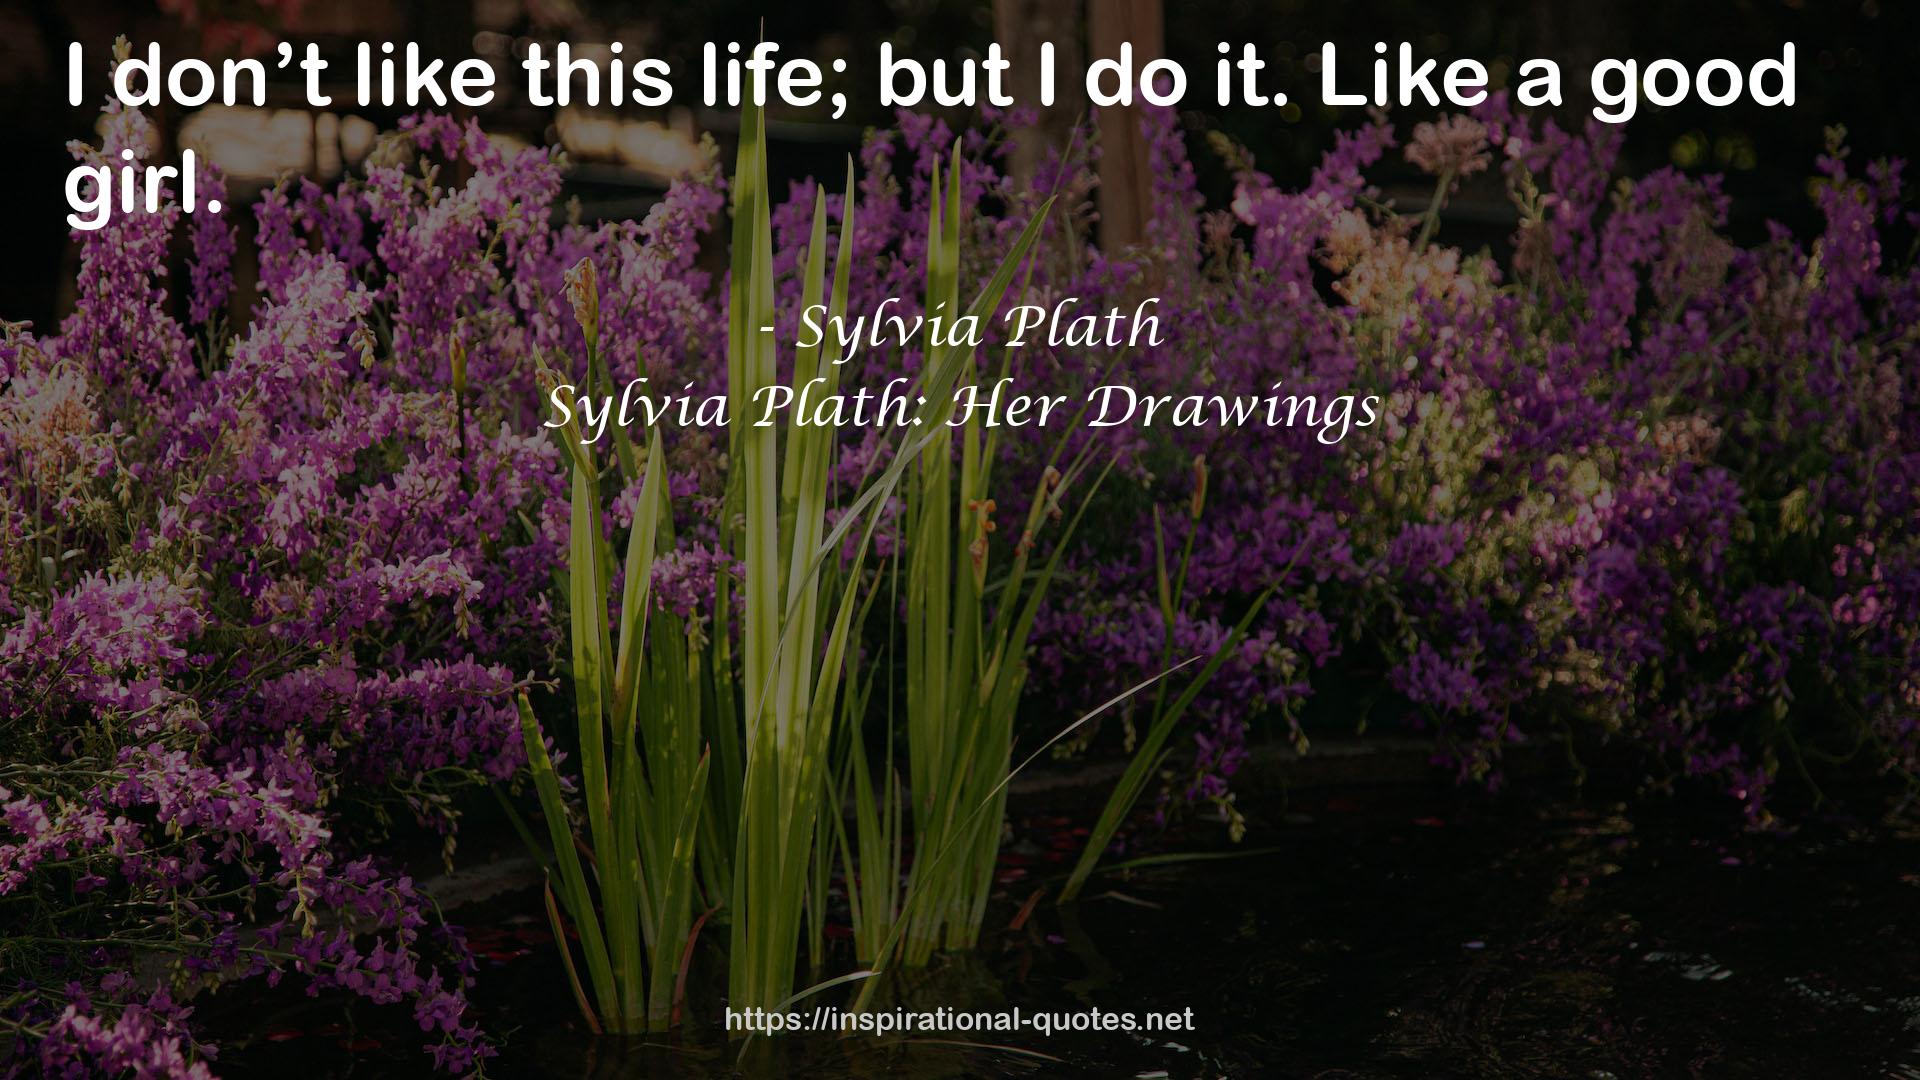 Sylvia Plath: Her Drawings QUOTES